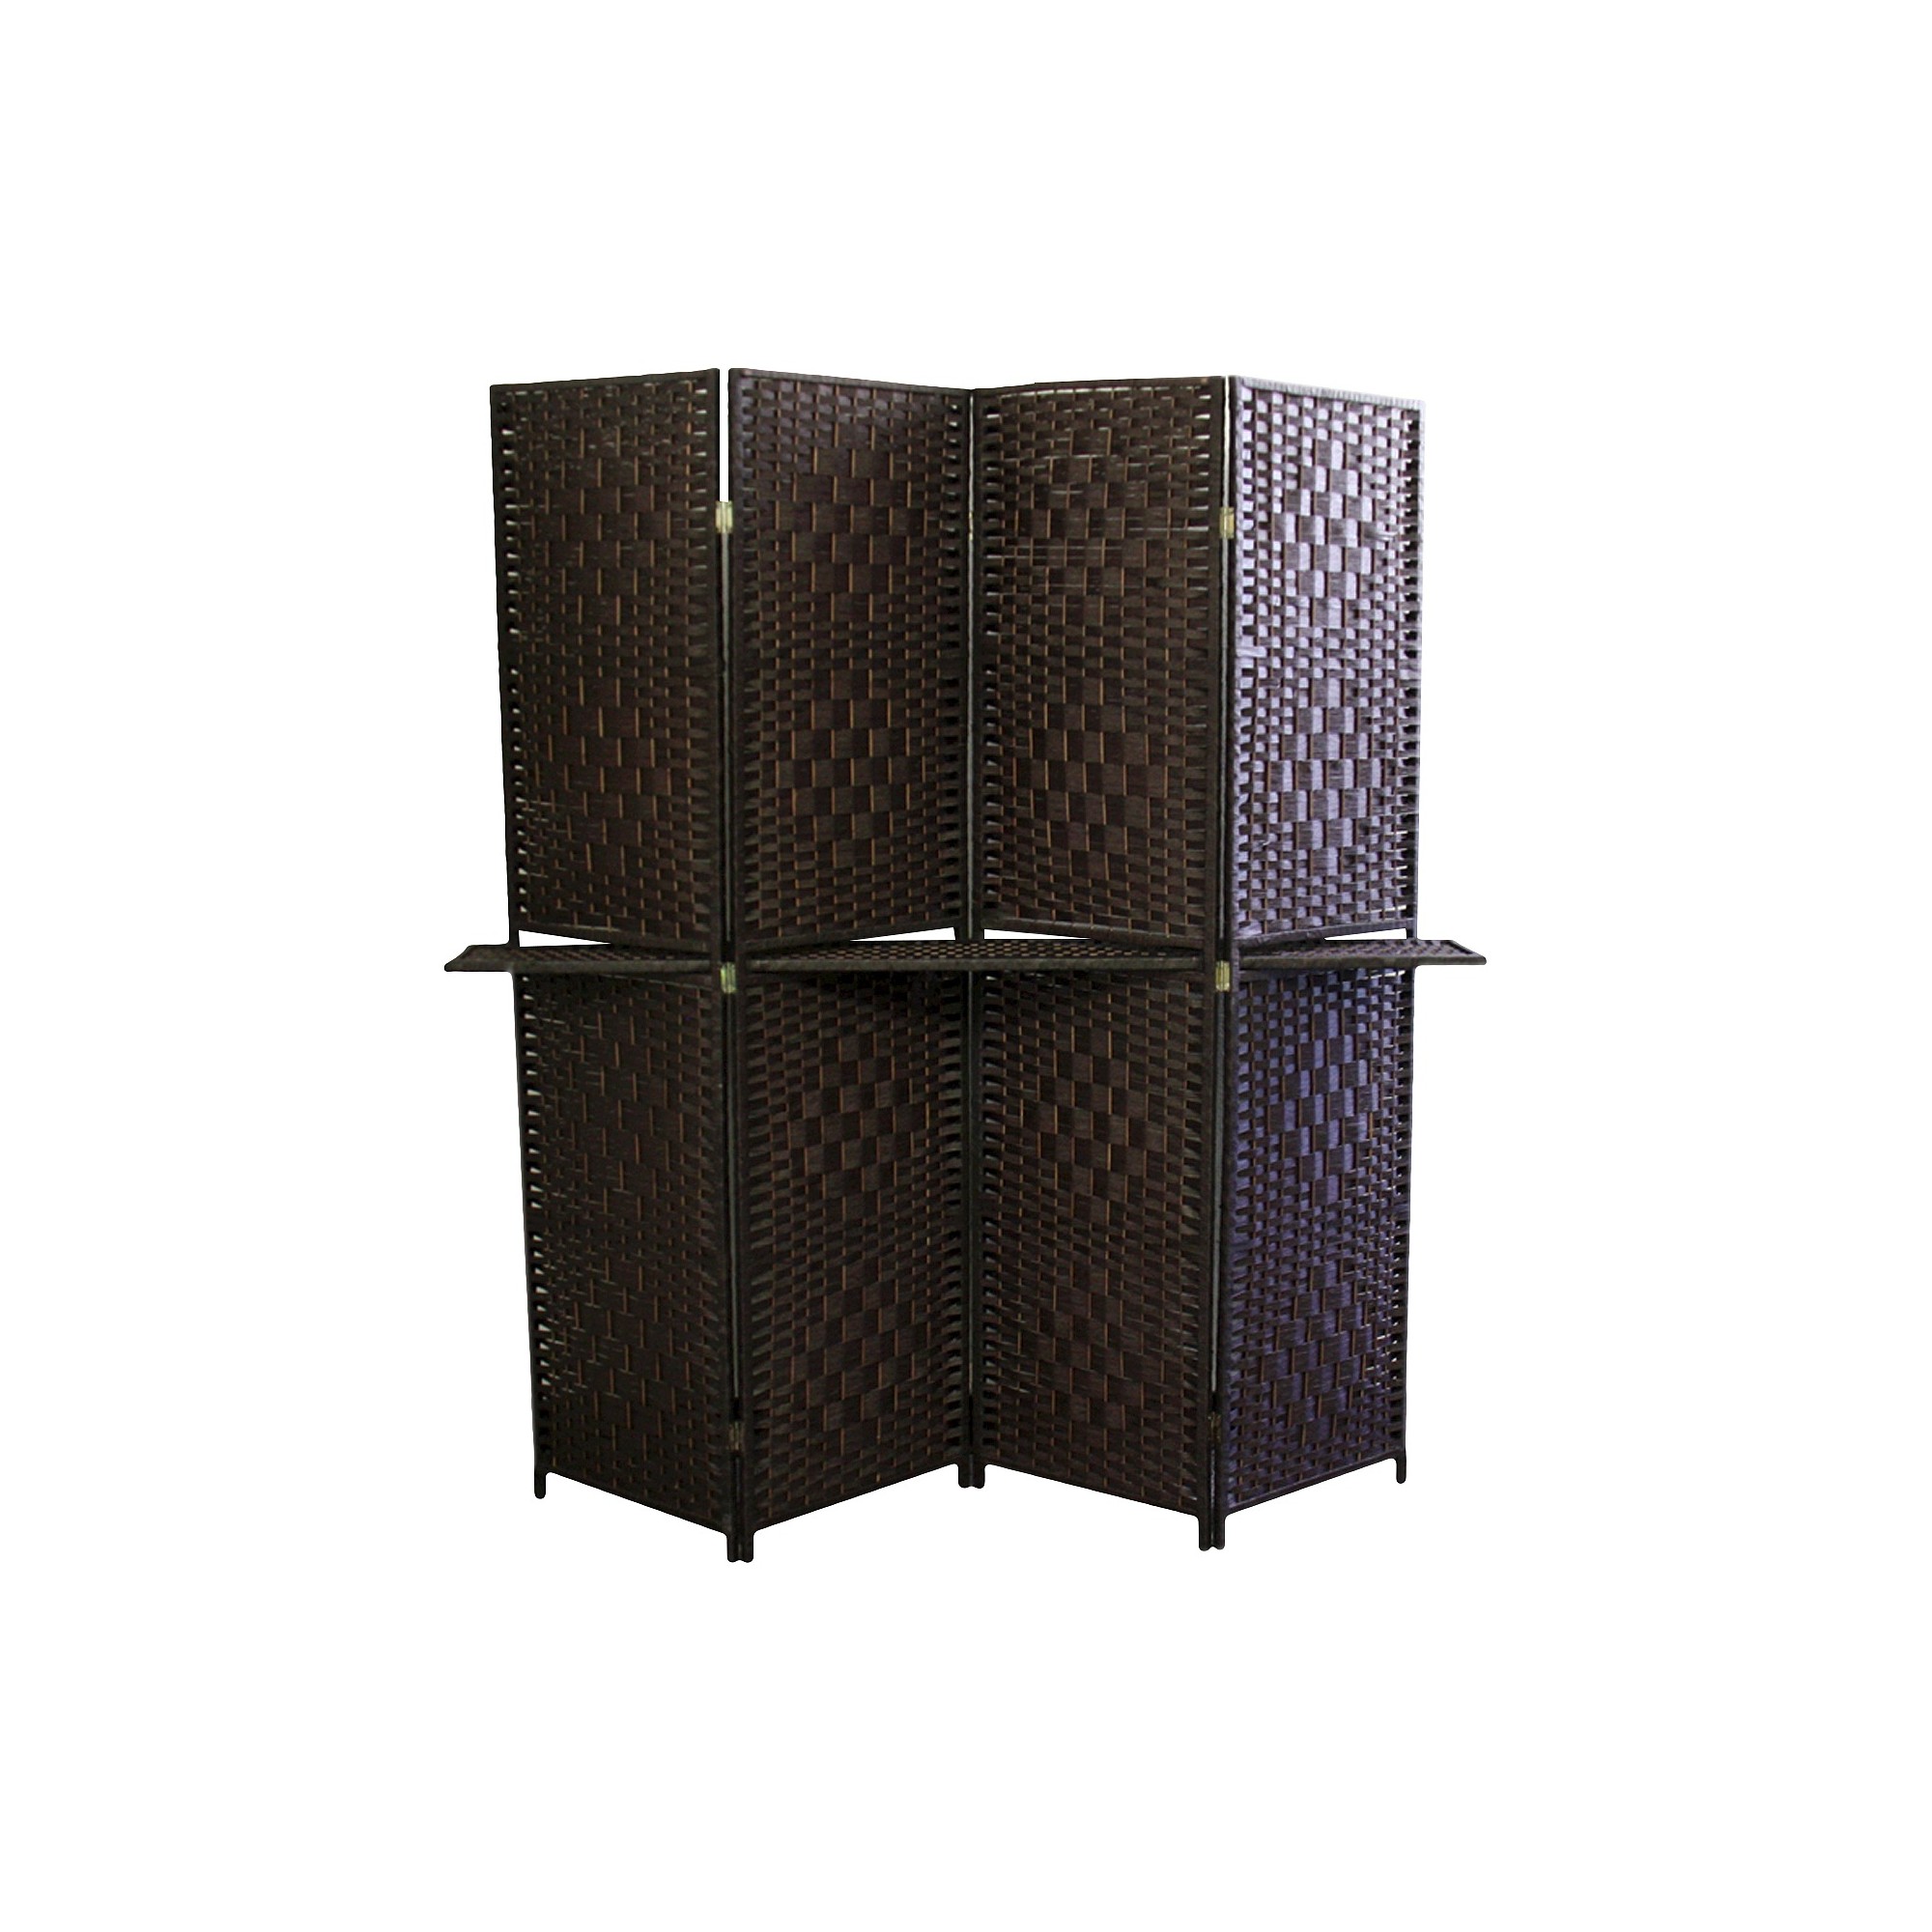 '4 Panel Paper Straw Weave Screen with 63'' L Shelving - Ore International, Brown'